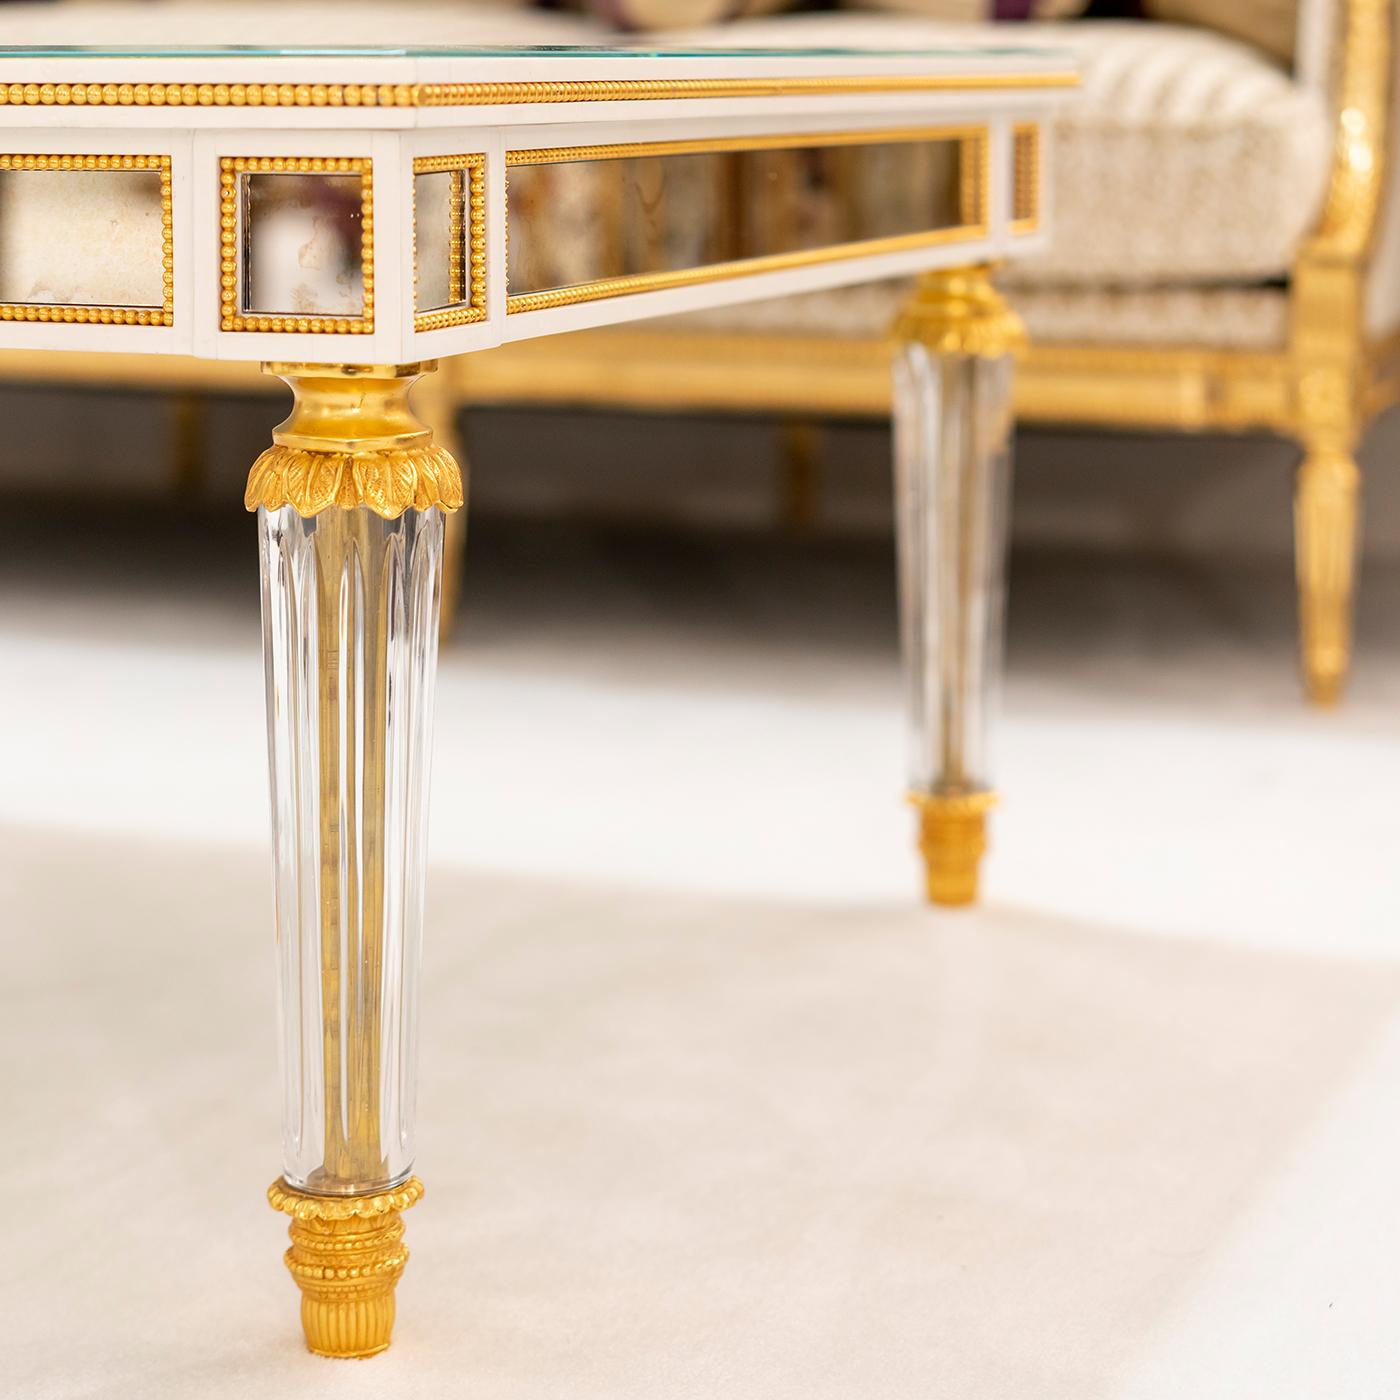 A marvelous showcase of craftsmanship that will furnish the most elegant and luxurious interior decors, this gorgeous coffee table is fashioned of arable wood enriched with 24K gold-plated bronze and crystal details. The top is covered with glass